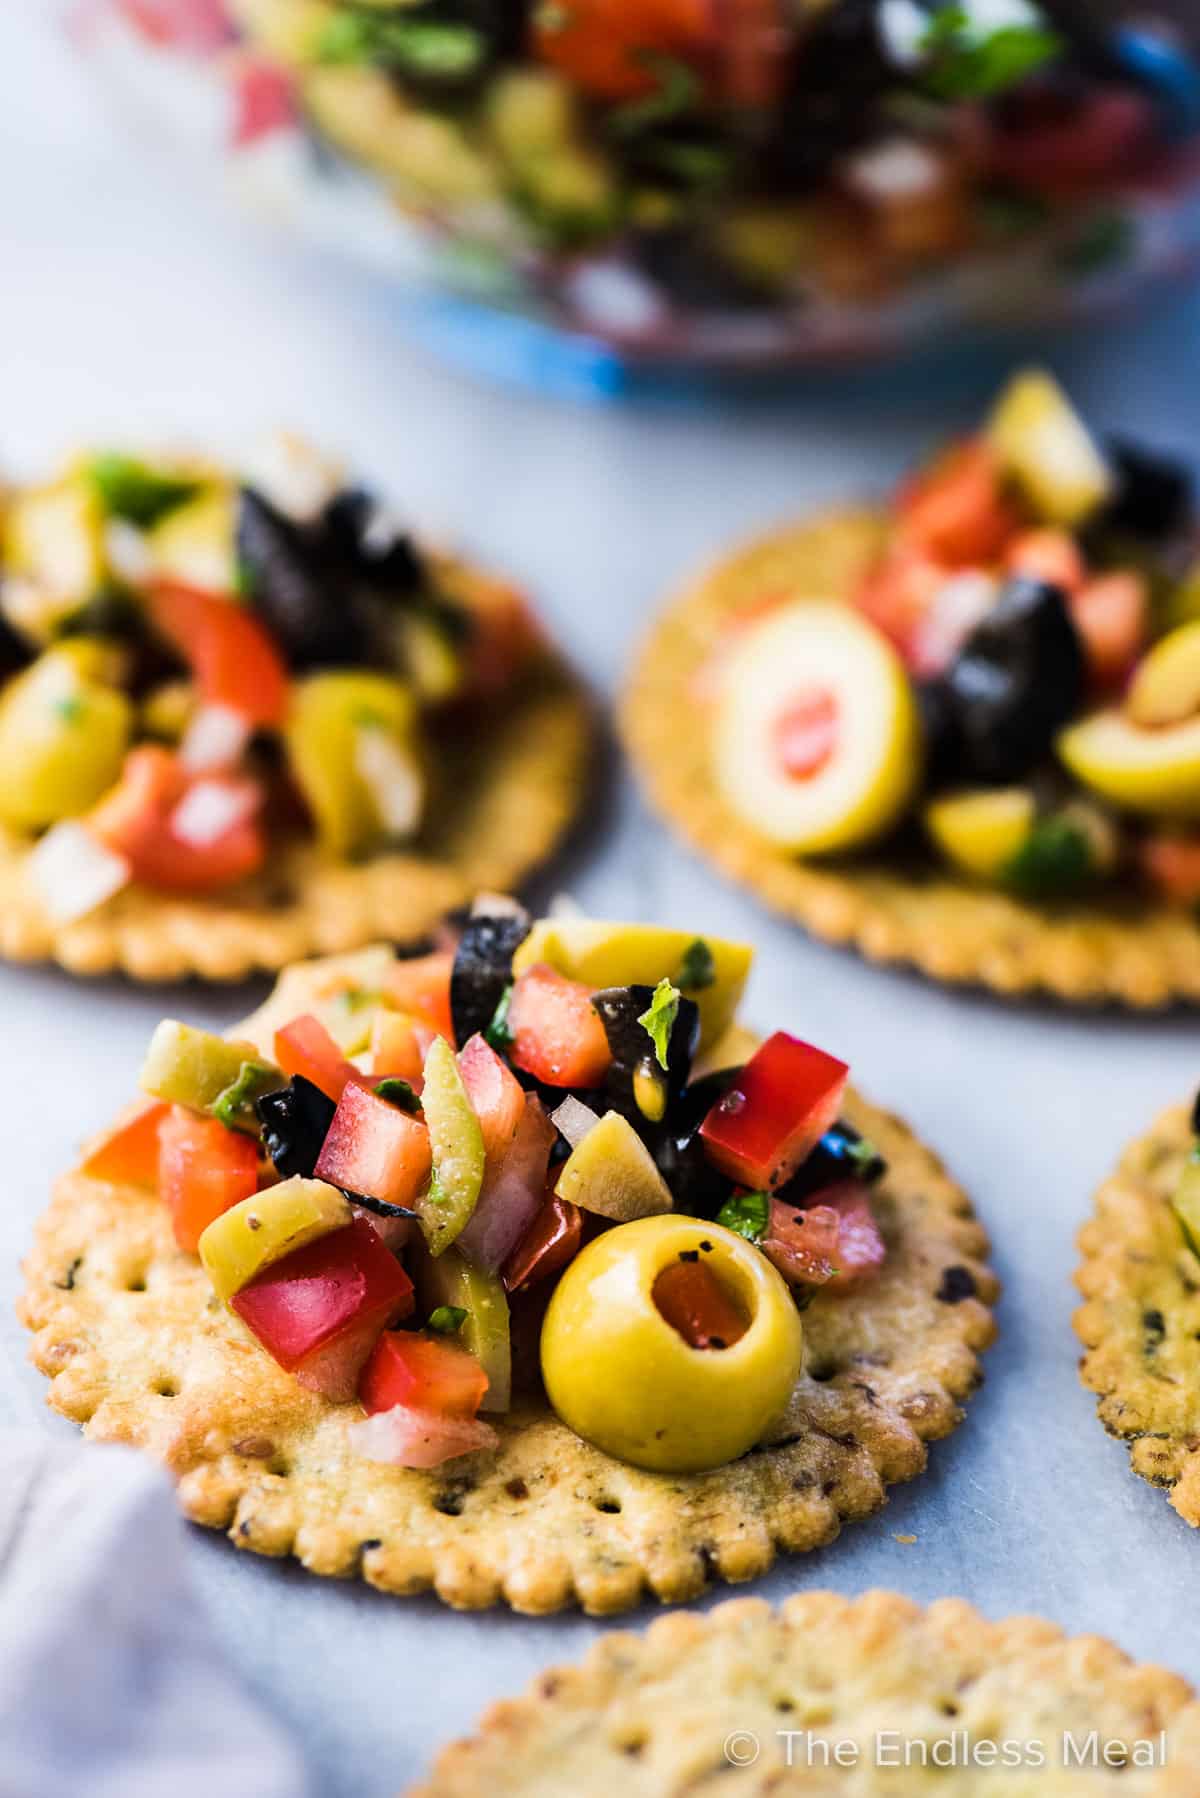 Olive salsa piled on top of crackers.